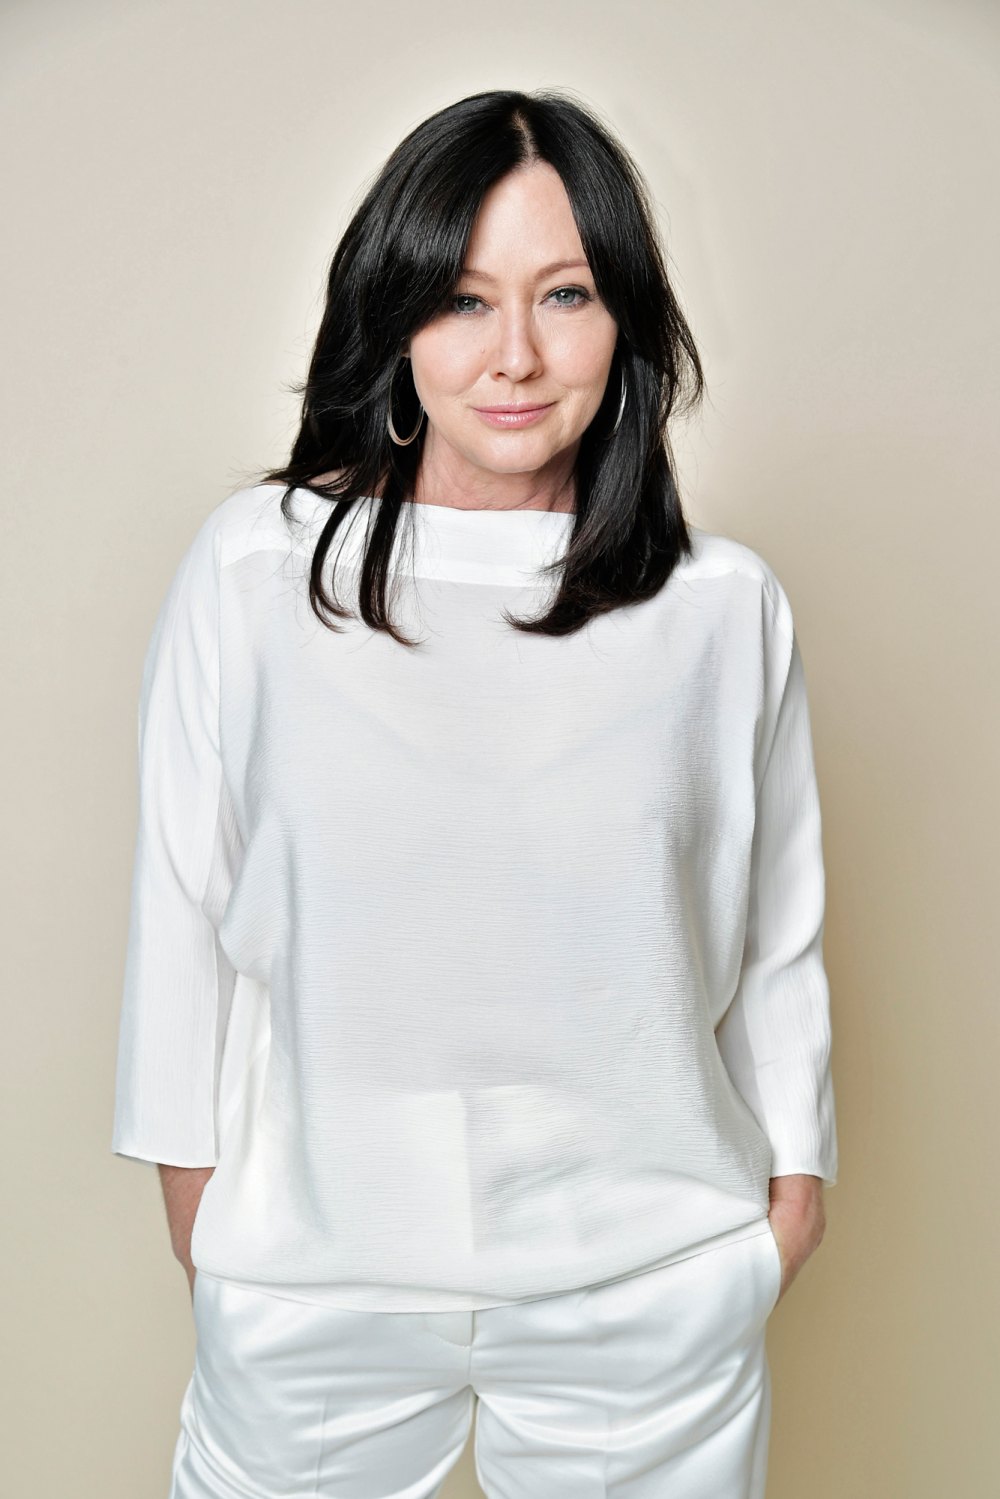 Shannen Doherty Has No Plans to Quit Hollywood as She Battles Cancer